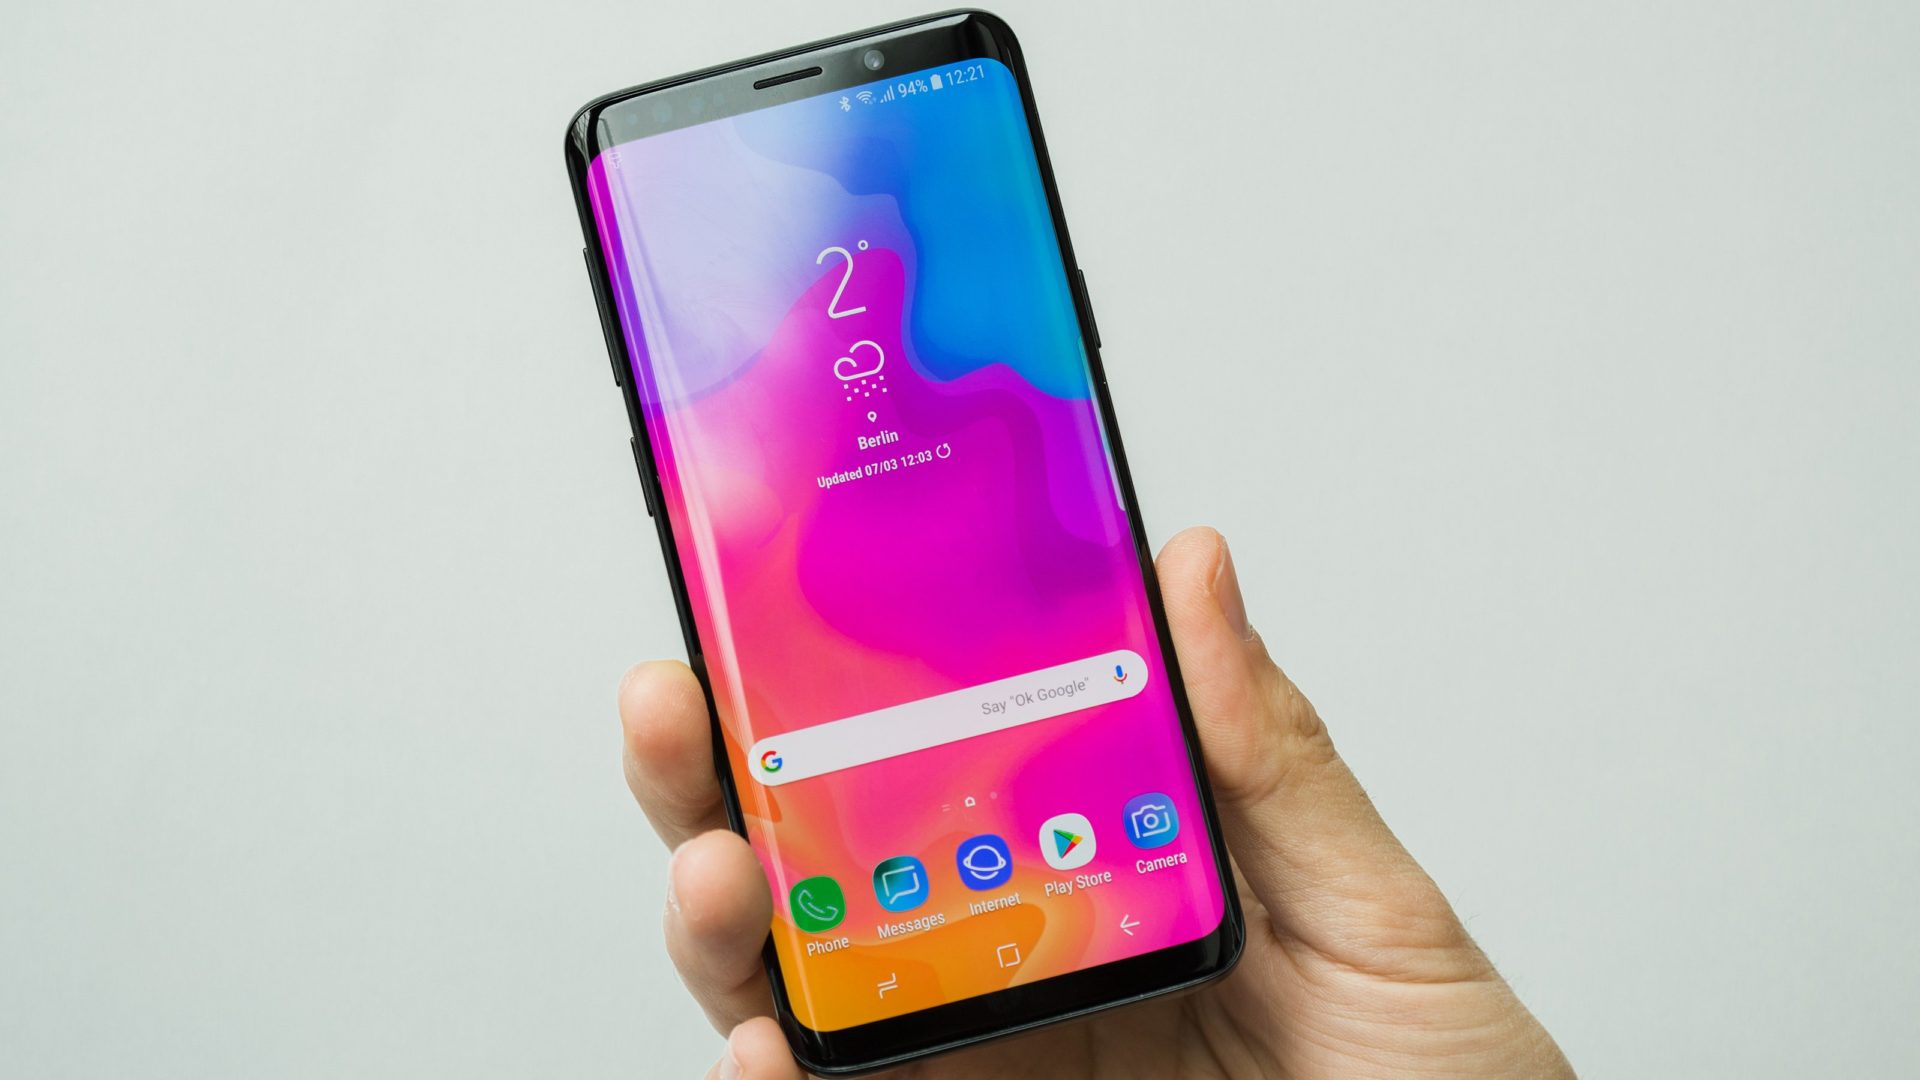 Samsung Could Be Developing a Bitcoin (BTC) and Crypto Wallet App for The Galaxy S10 10